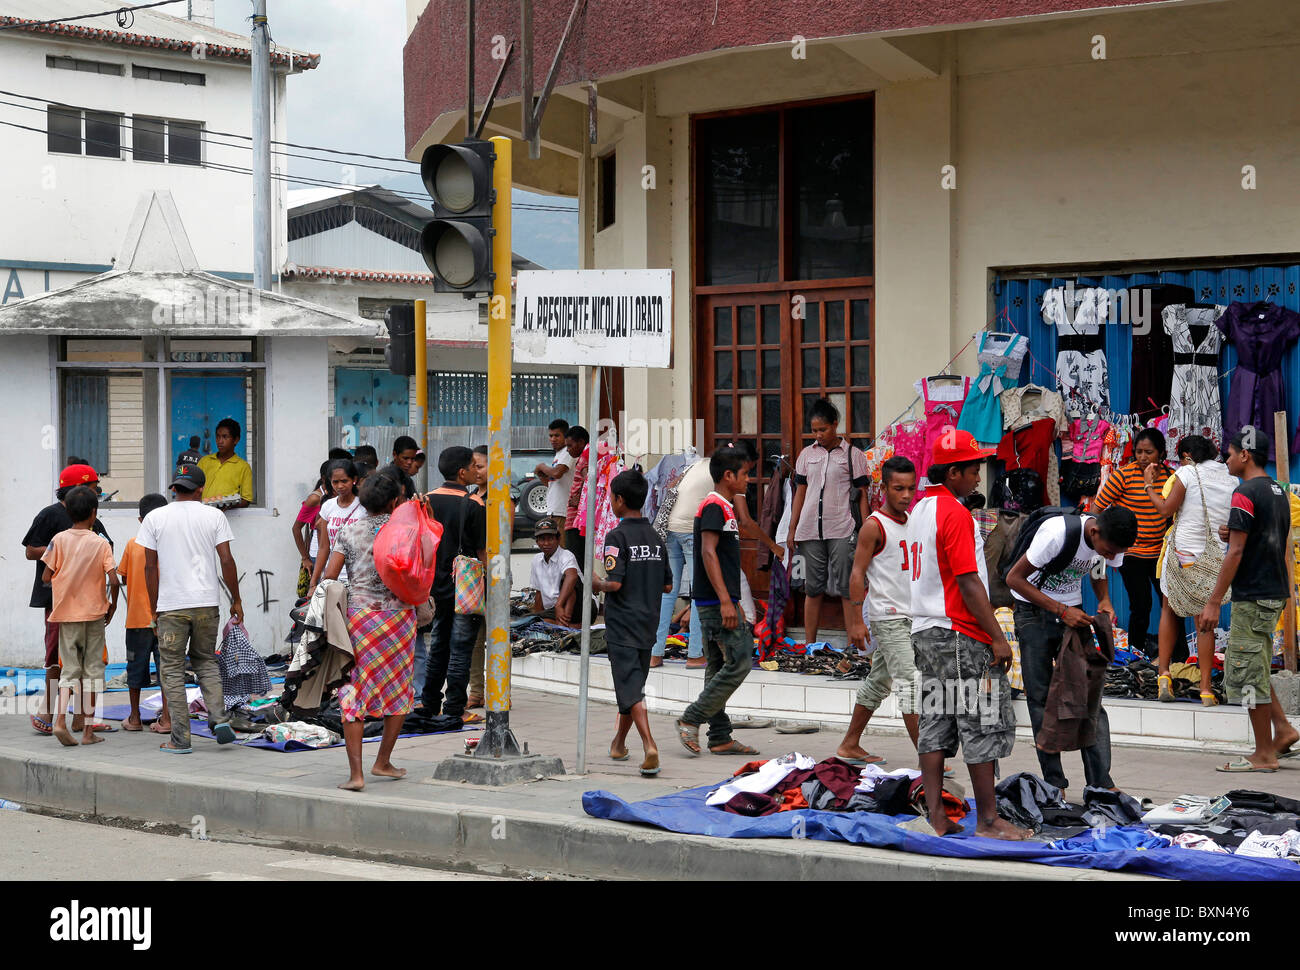 Second hand clothes are beeing sold in the Colmera commercial district of Dili capital of Timor Leste (East Timor) Stock Photo